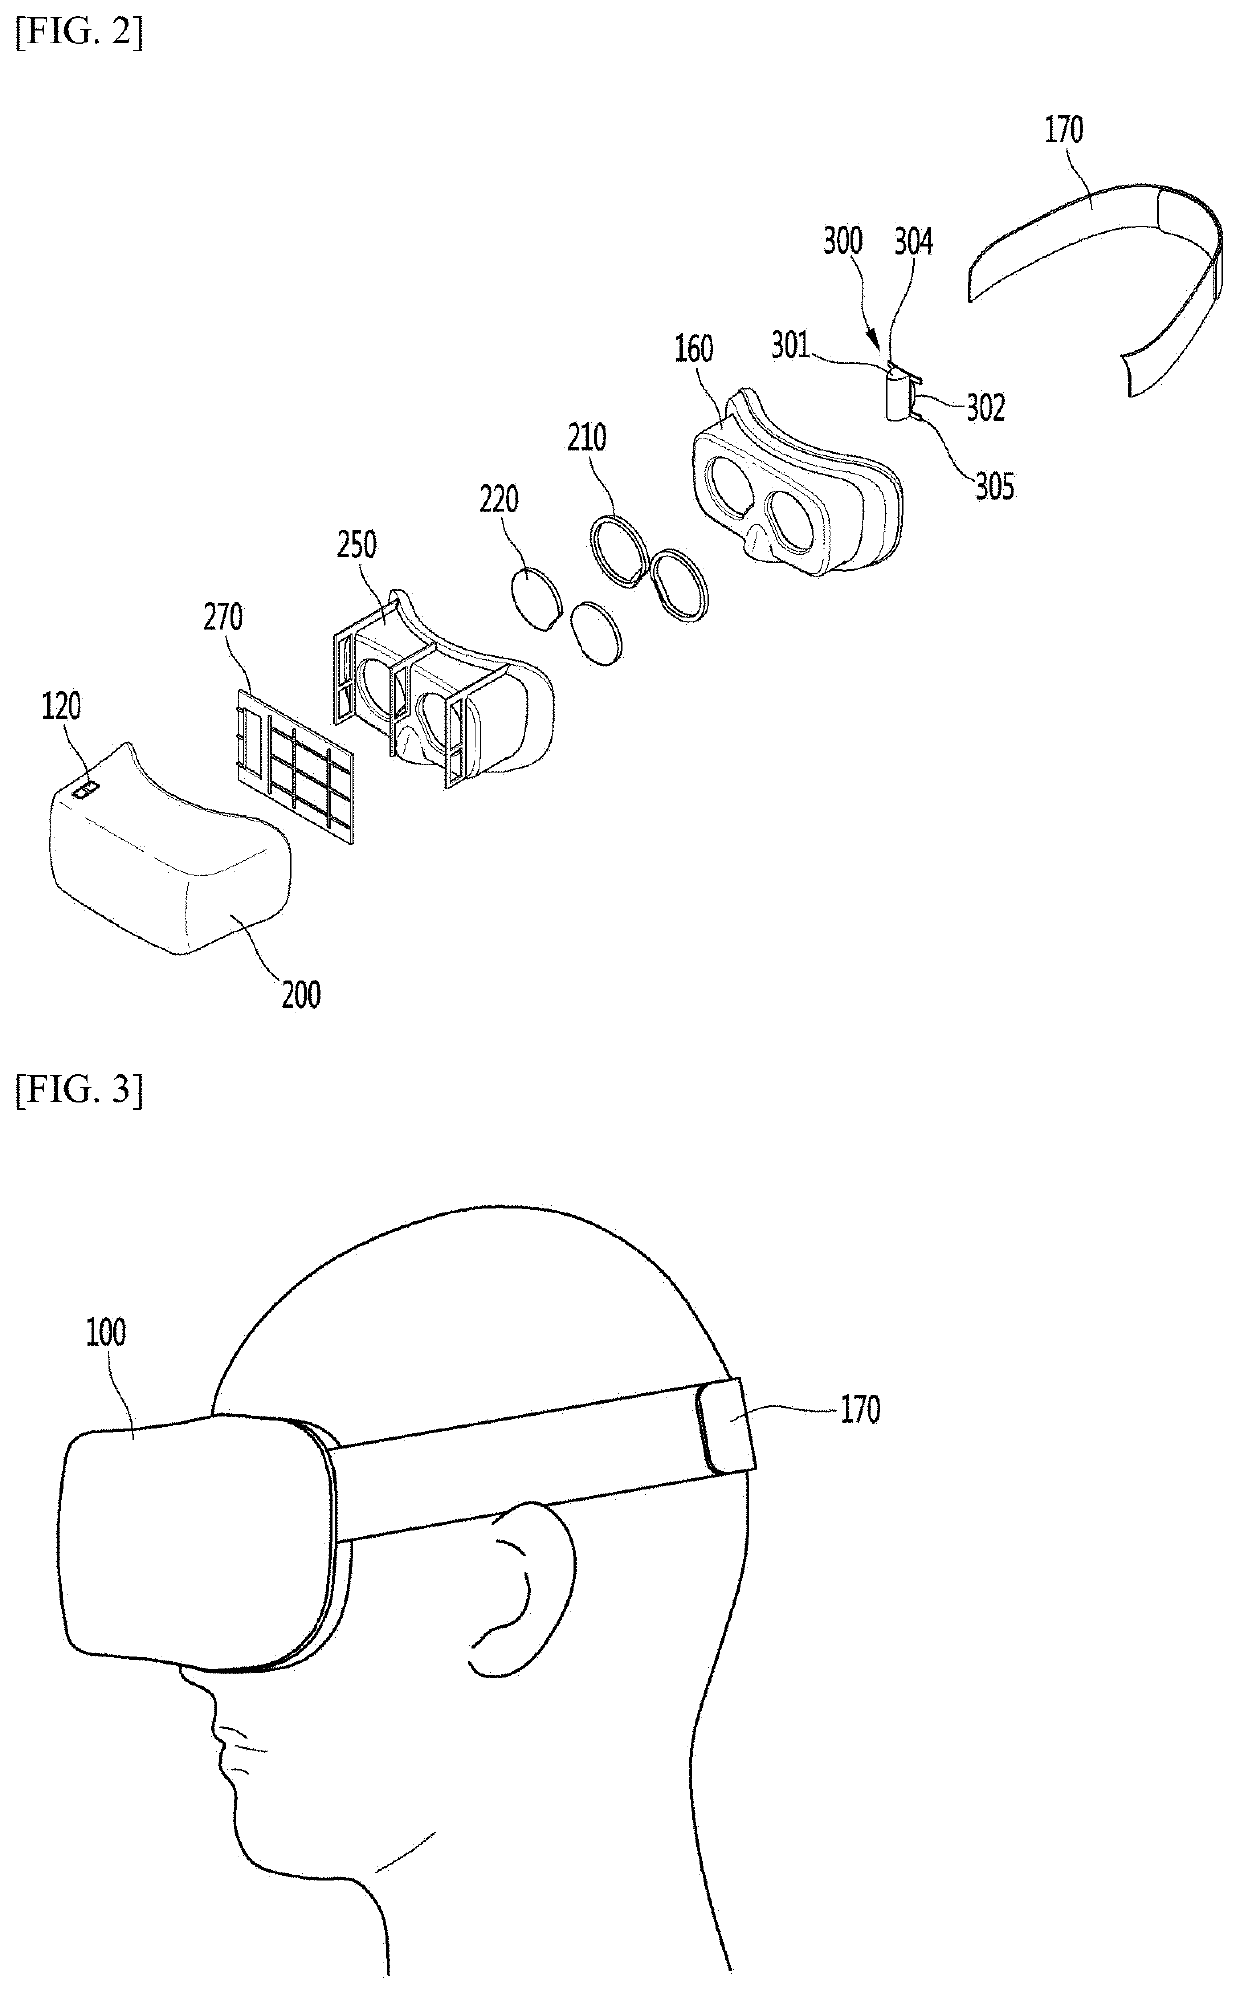 Head mounted display device for eye examination and method for ophthalmic examination using therefor